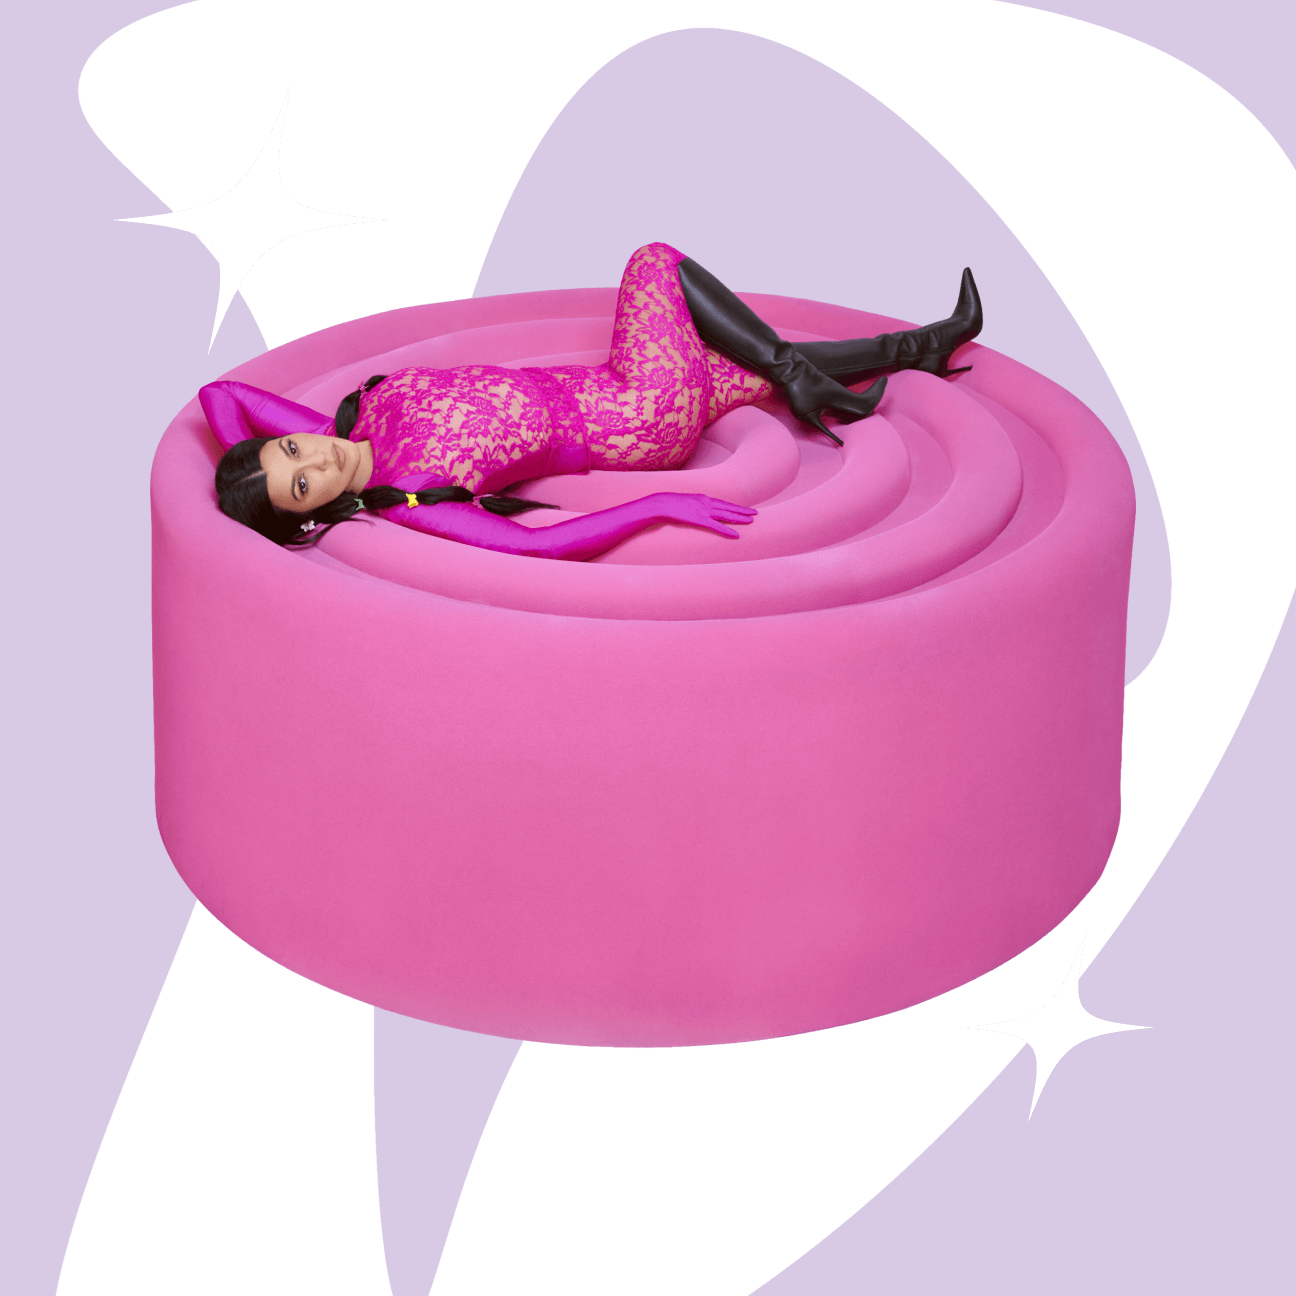 Kourtney laying on top of an oversized pink gummy with lemme debloat shape in the background